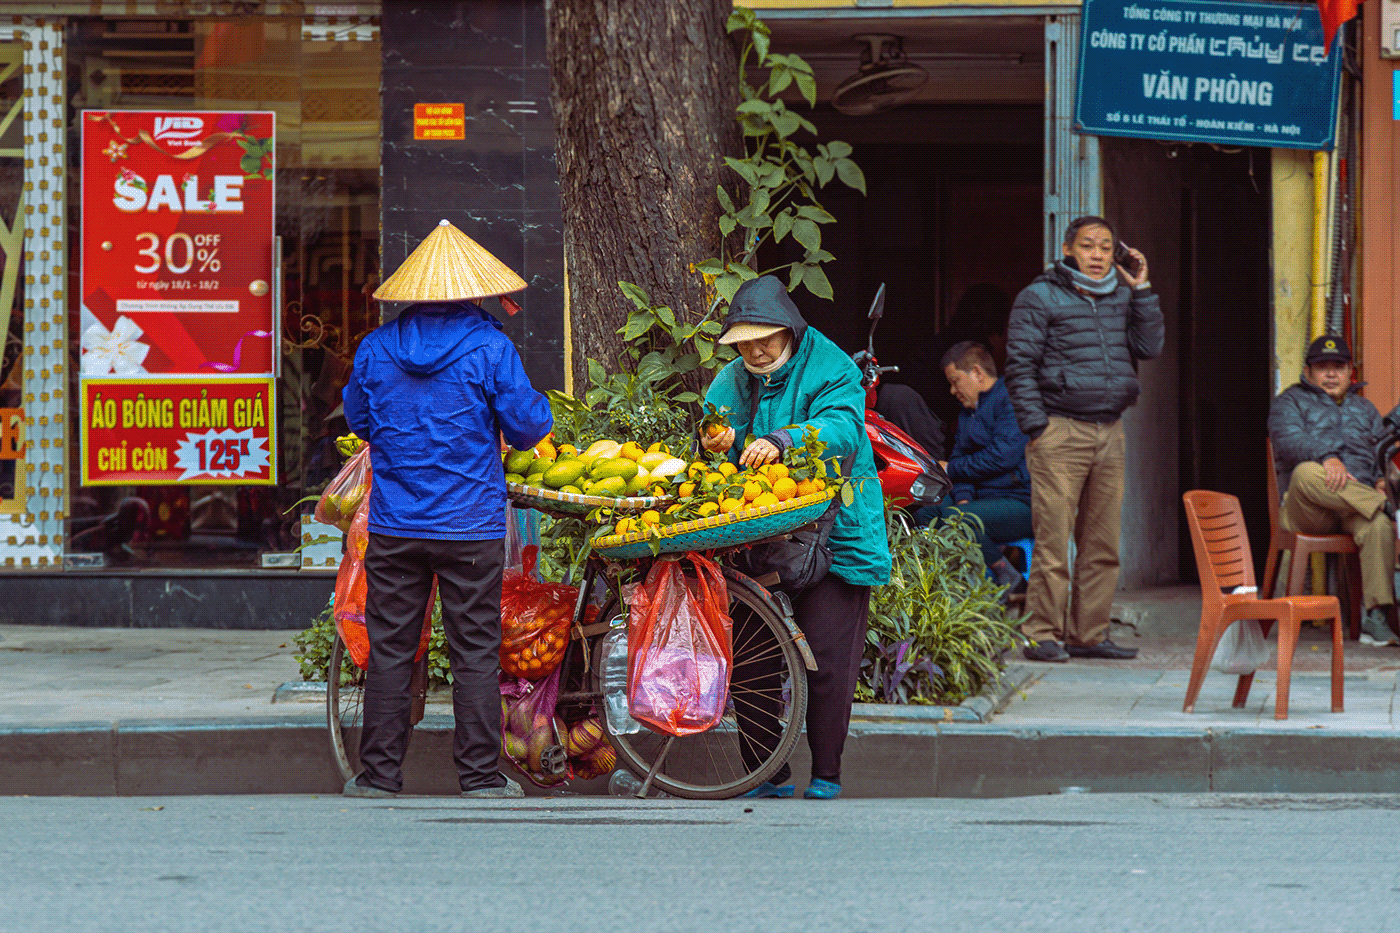 Hanoi on a cold day